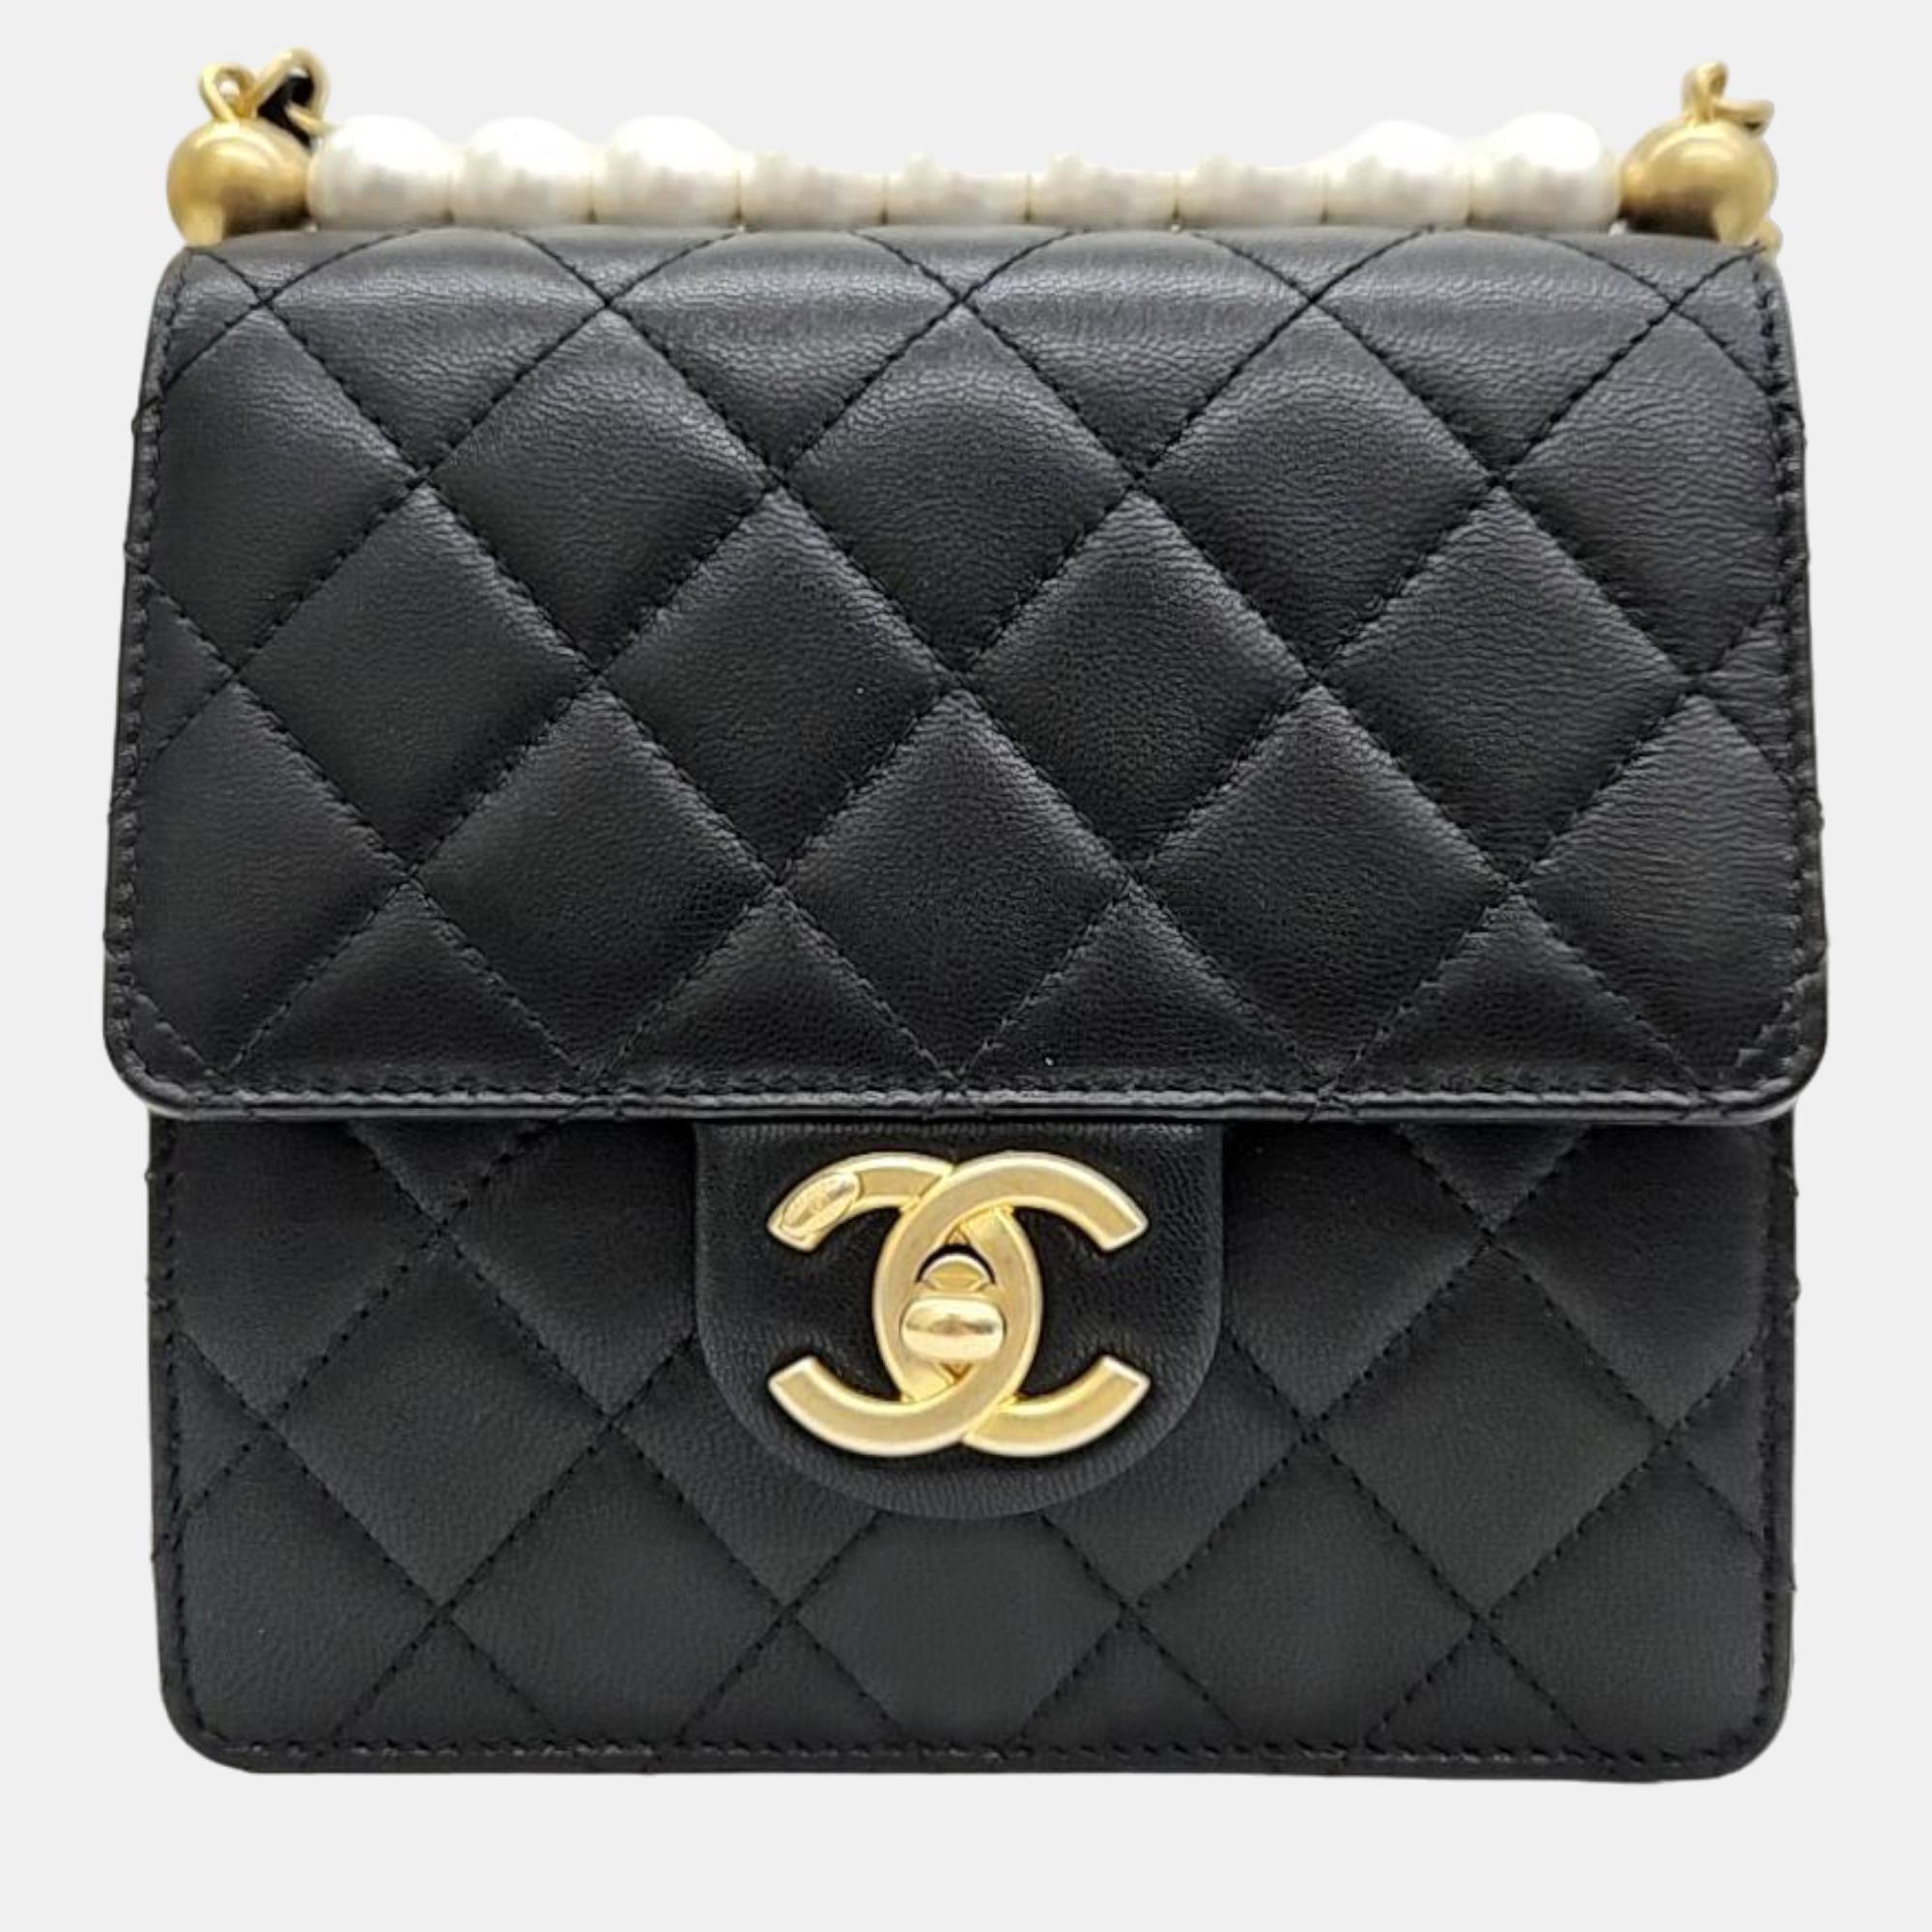 Chanel Black Leather Chic Pearl Flap Bag